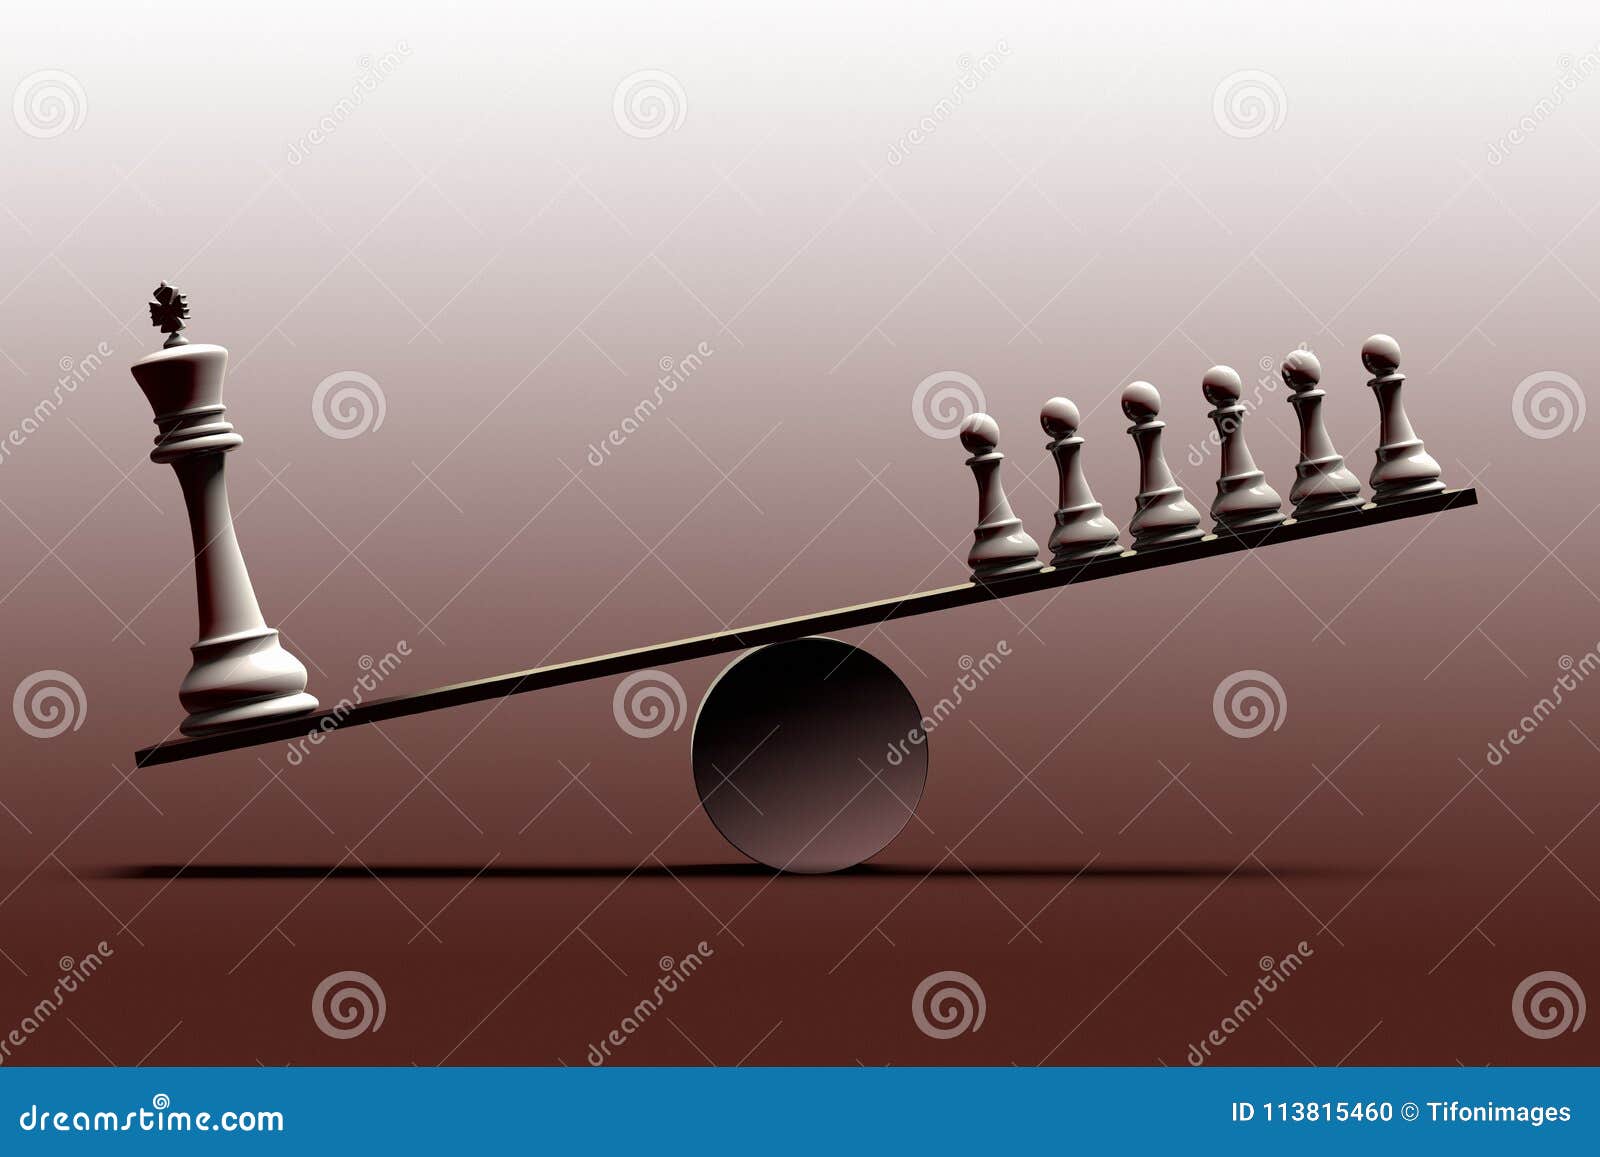 conceptual representation of social inequality and the imbalance between social classes represented with chess pieces